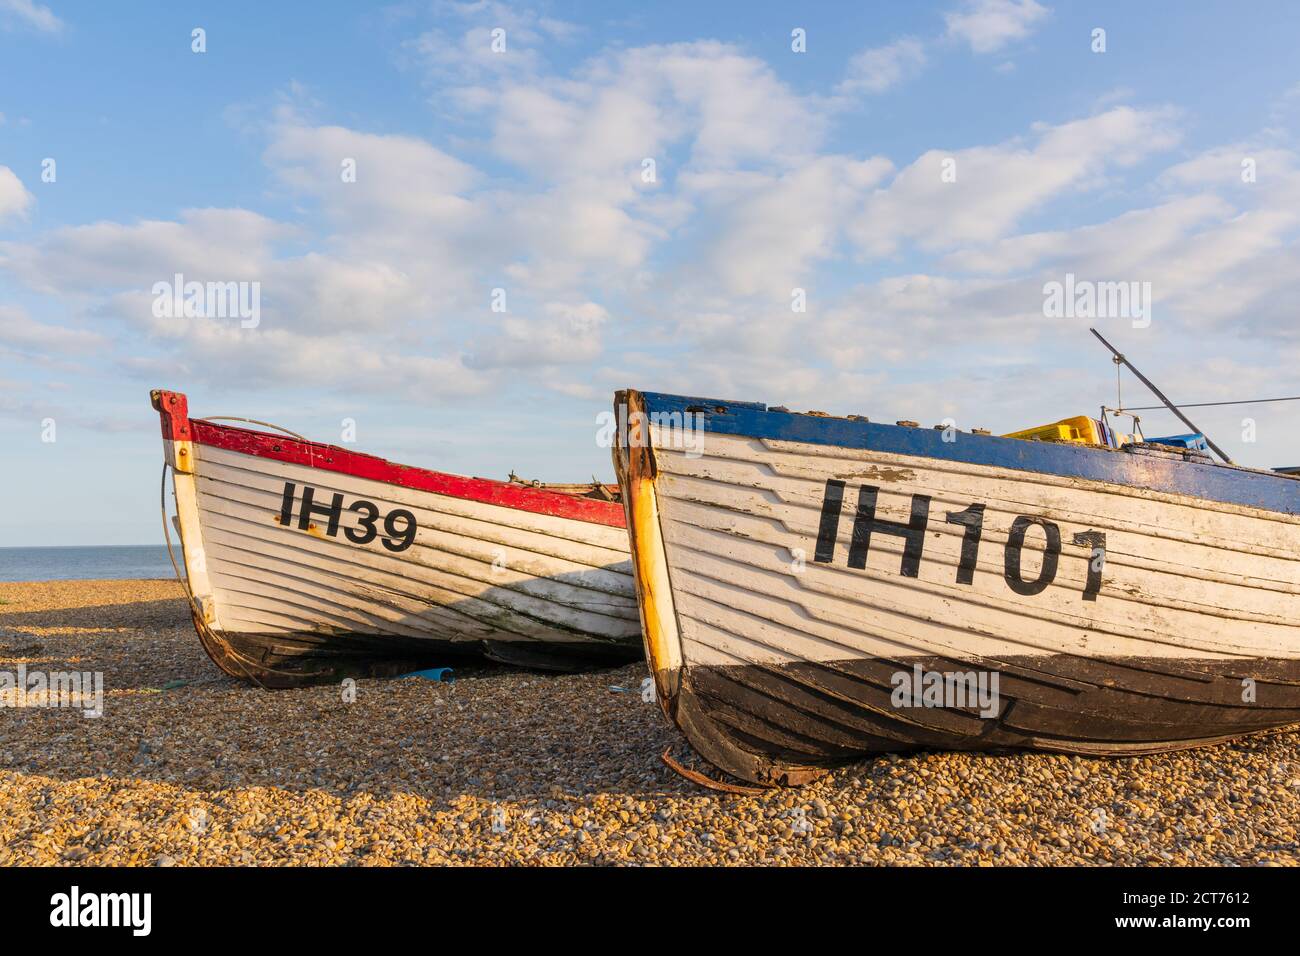 Aldeburgh, Suffolk. UK. 2020. Abandoned fishing boats on Aldeburgh Beach in a beautiful evening light. Stock Photo